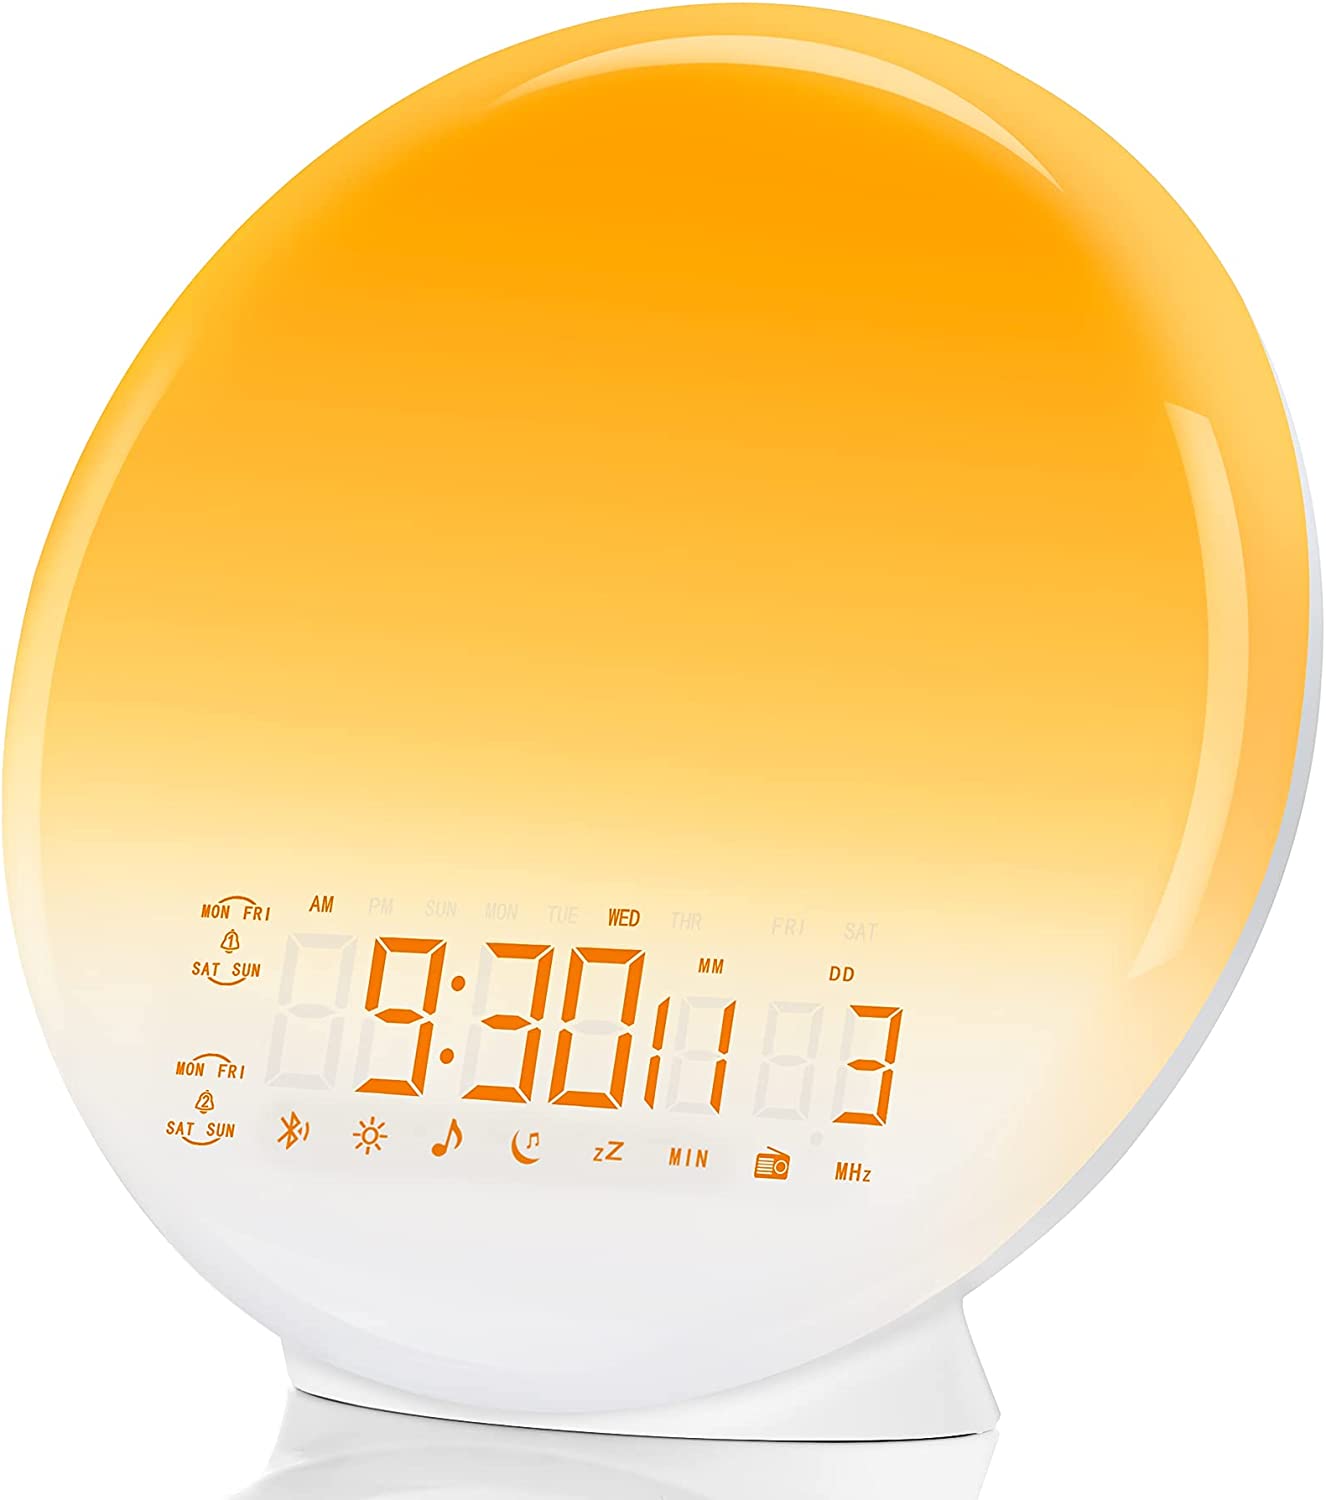 Sunrise Alarm Clock, Wake Up Light for Kids, Adults and Heavy Sleepers, Bedroom Digital Alarm Clock with 7 Colors Night Light, Dual Alarms, Snooze, FM Radio, Sleep Aid with 7 Nature Sounds, Gift Ideas